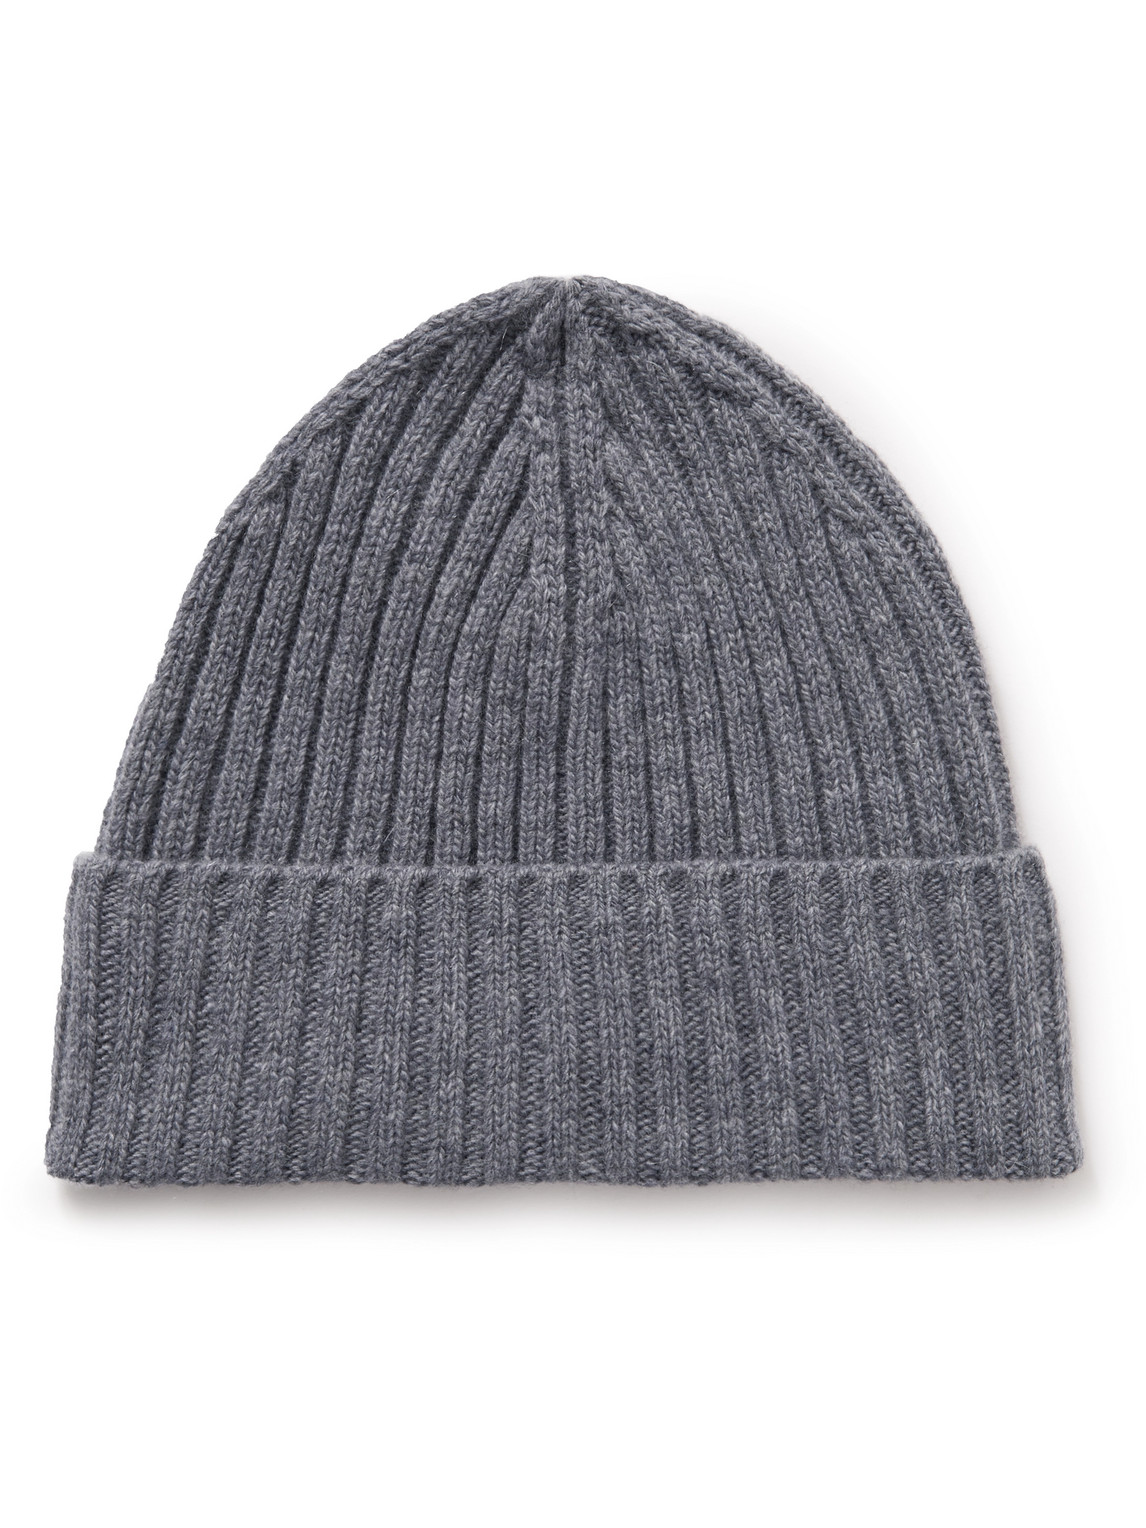 Officine Générale Ribbed Wool and Cashmere-Blend Beanie